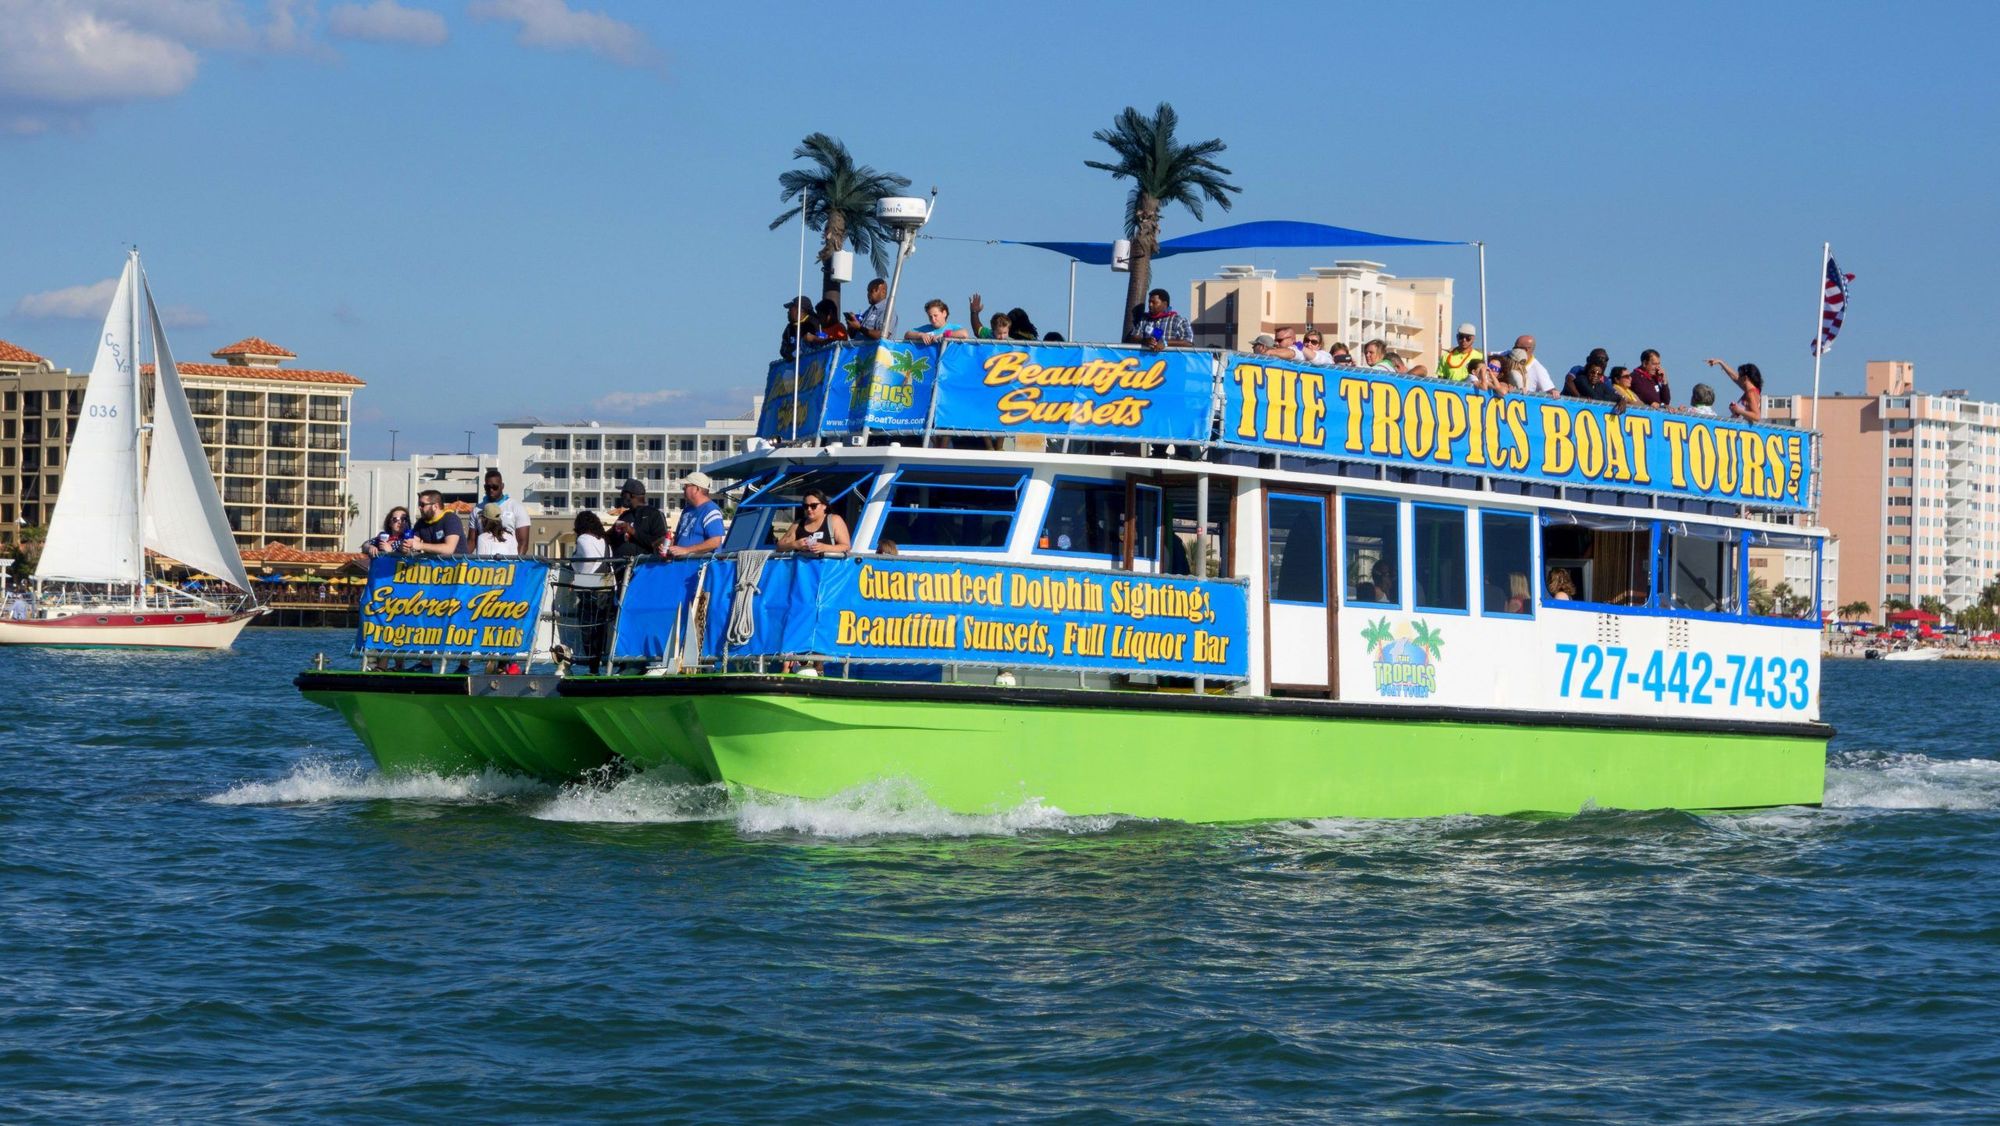 The Tropic Boat Tours